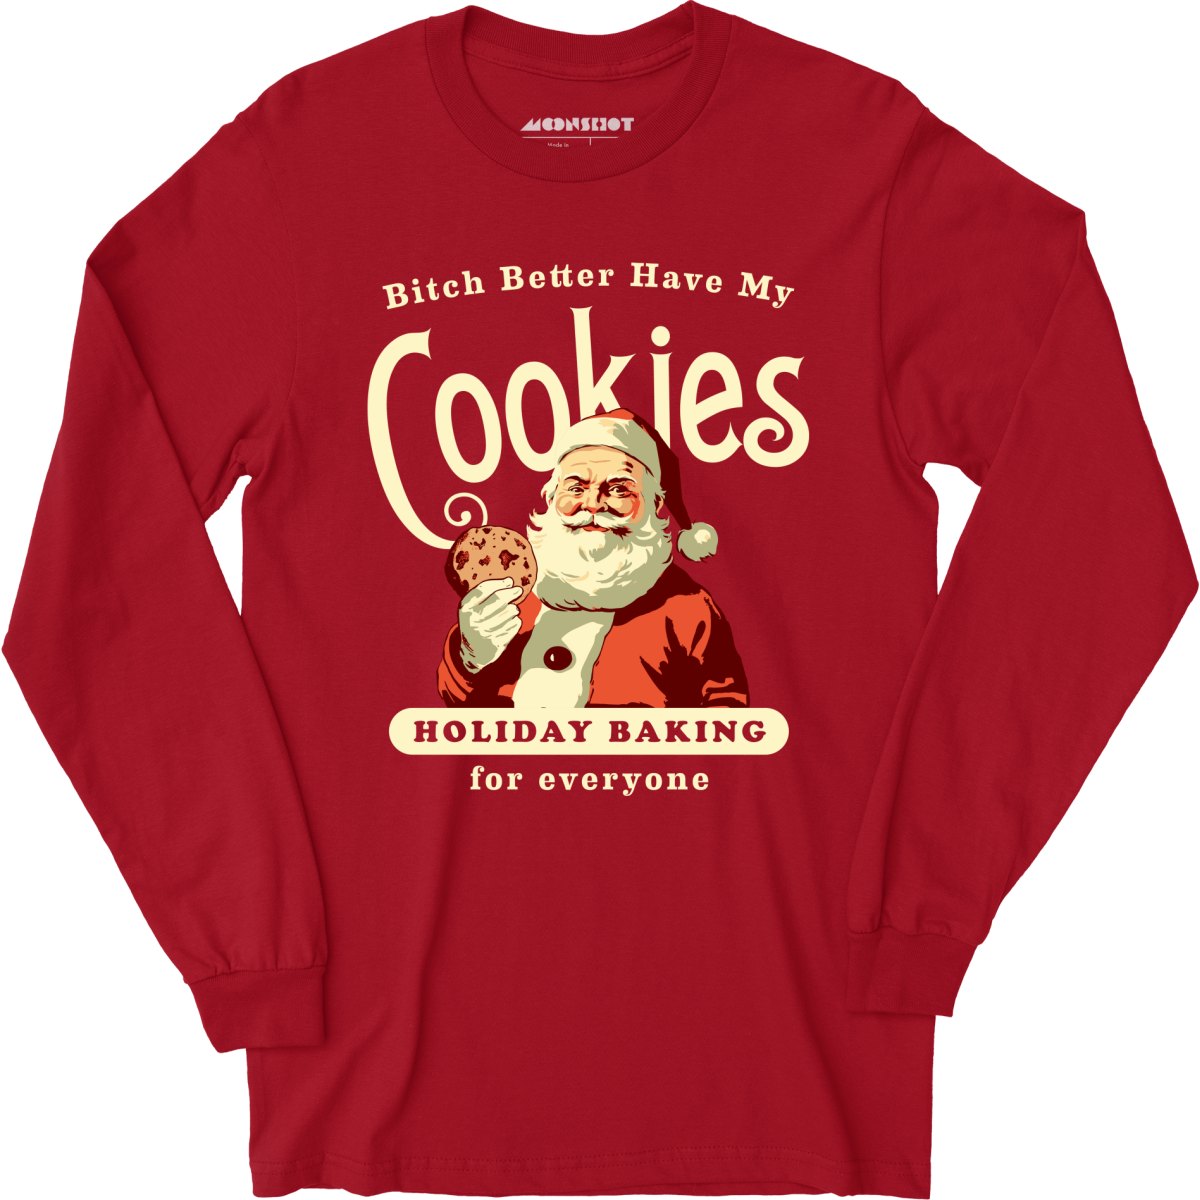 Bitch Better Have My Cookies Holiday Baking - Long Sleeve T-Shirt